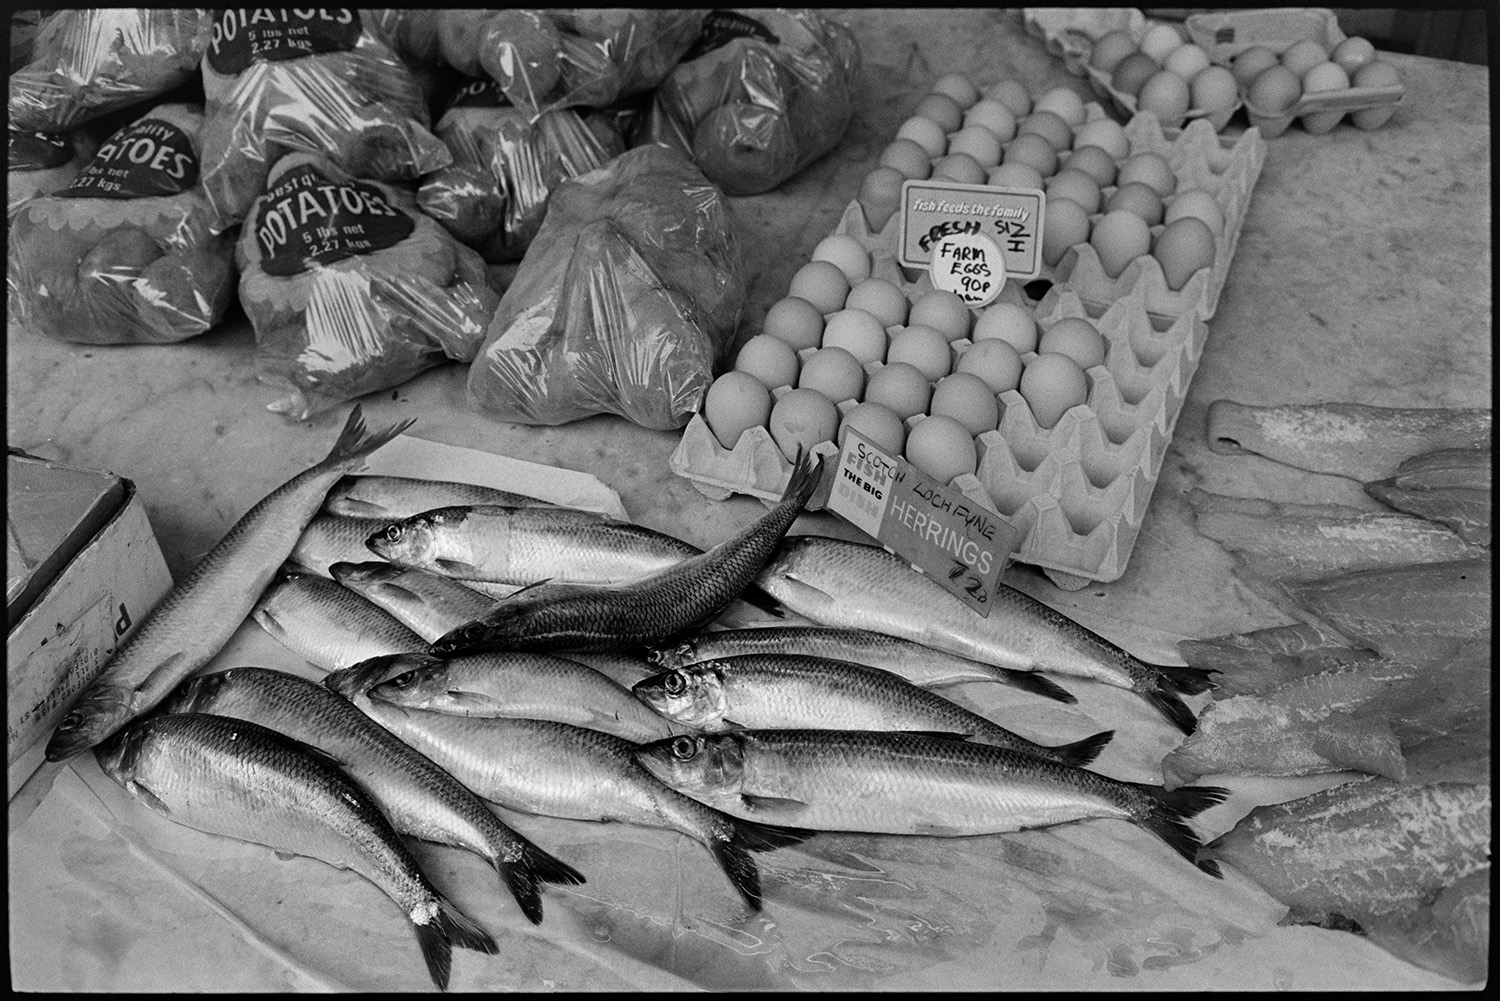 Fish and eggs on display.
[Bags of potatoes, trays of eggs, and herring fish, for sale at Barnstaple Pannier Market.]